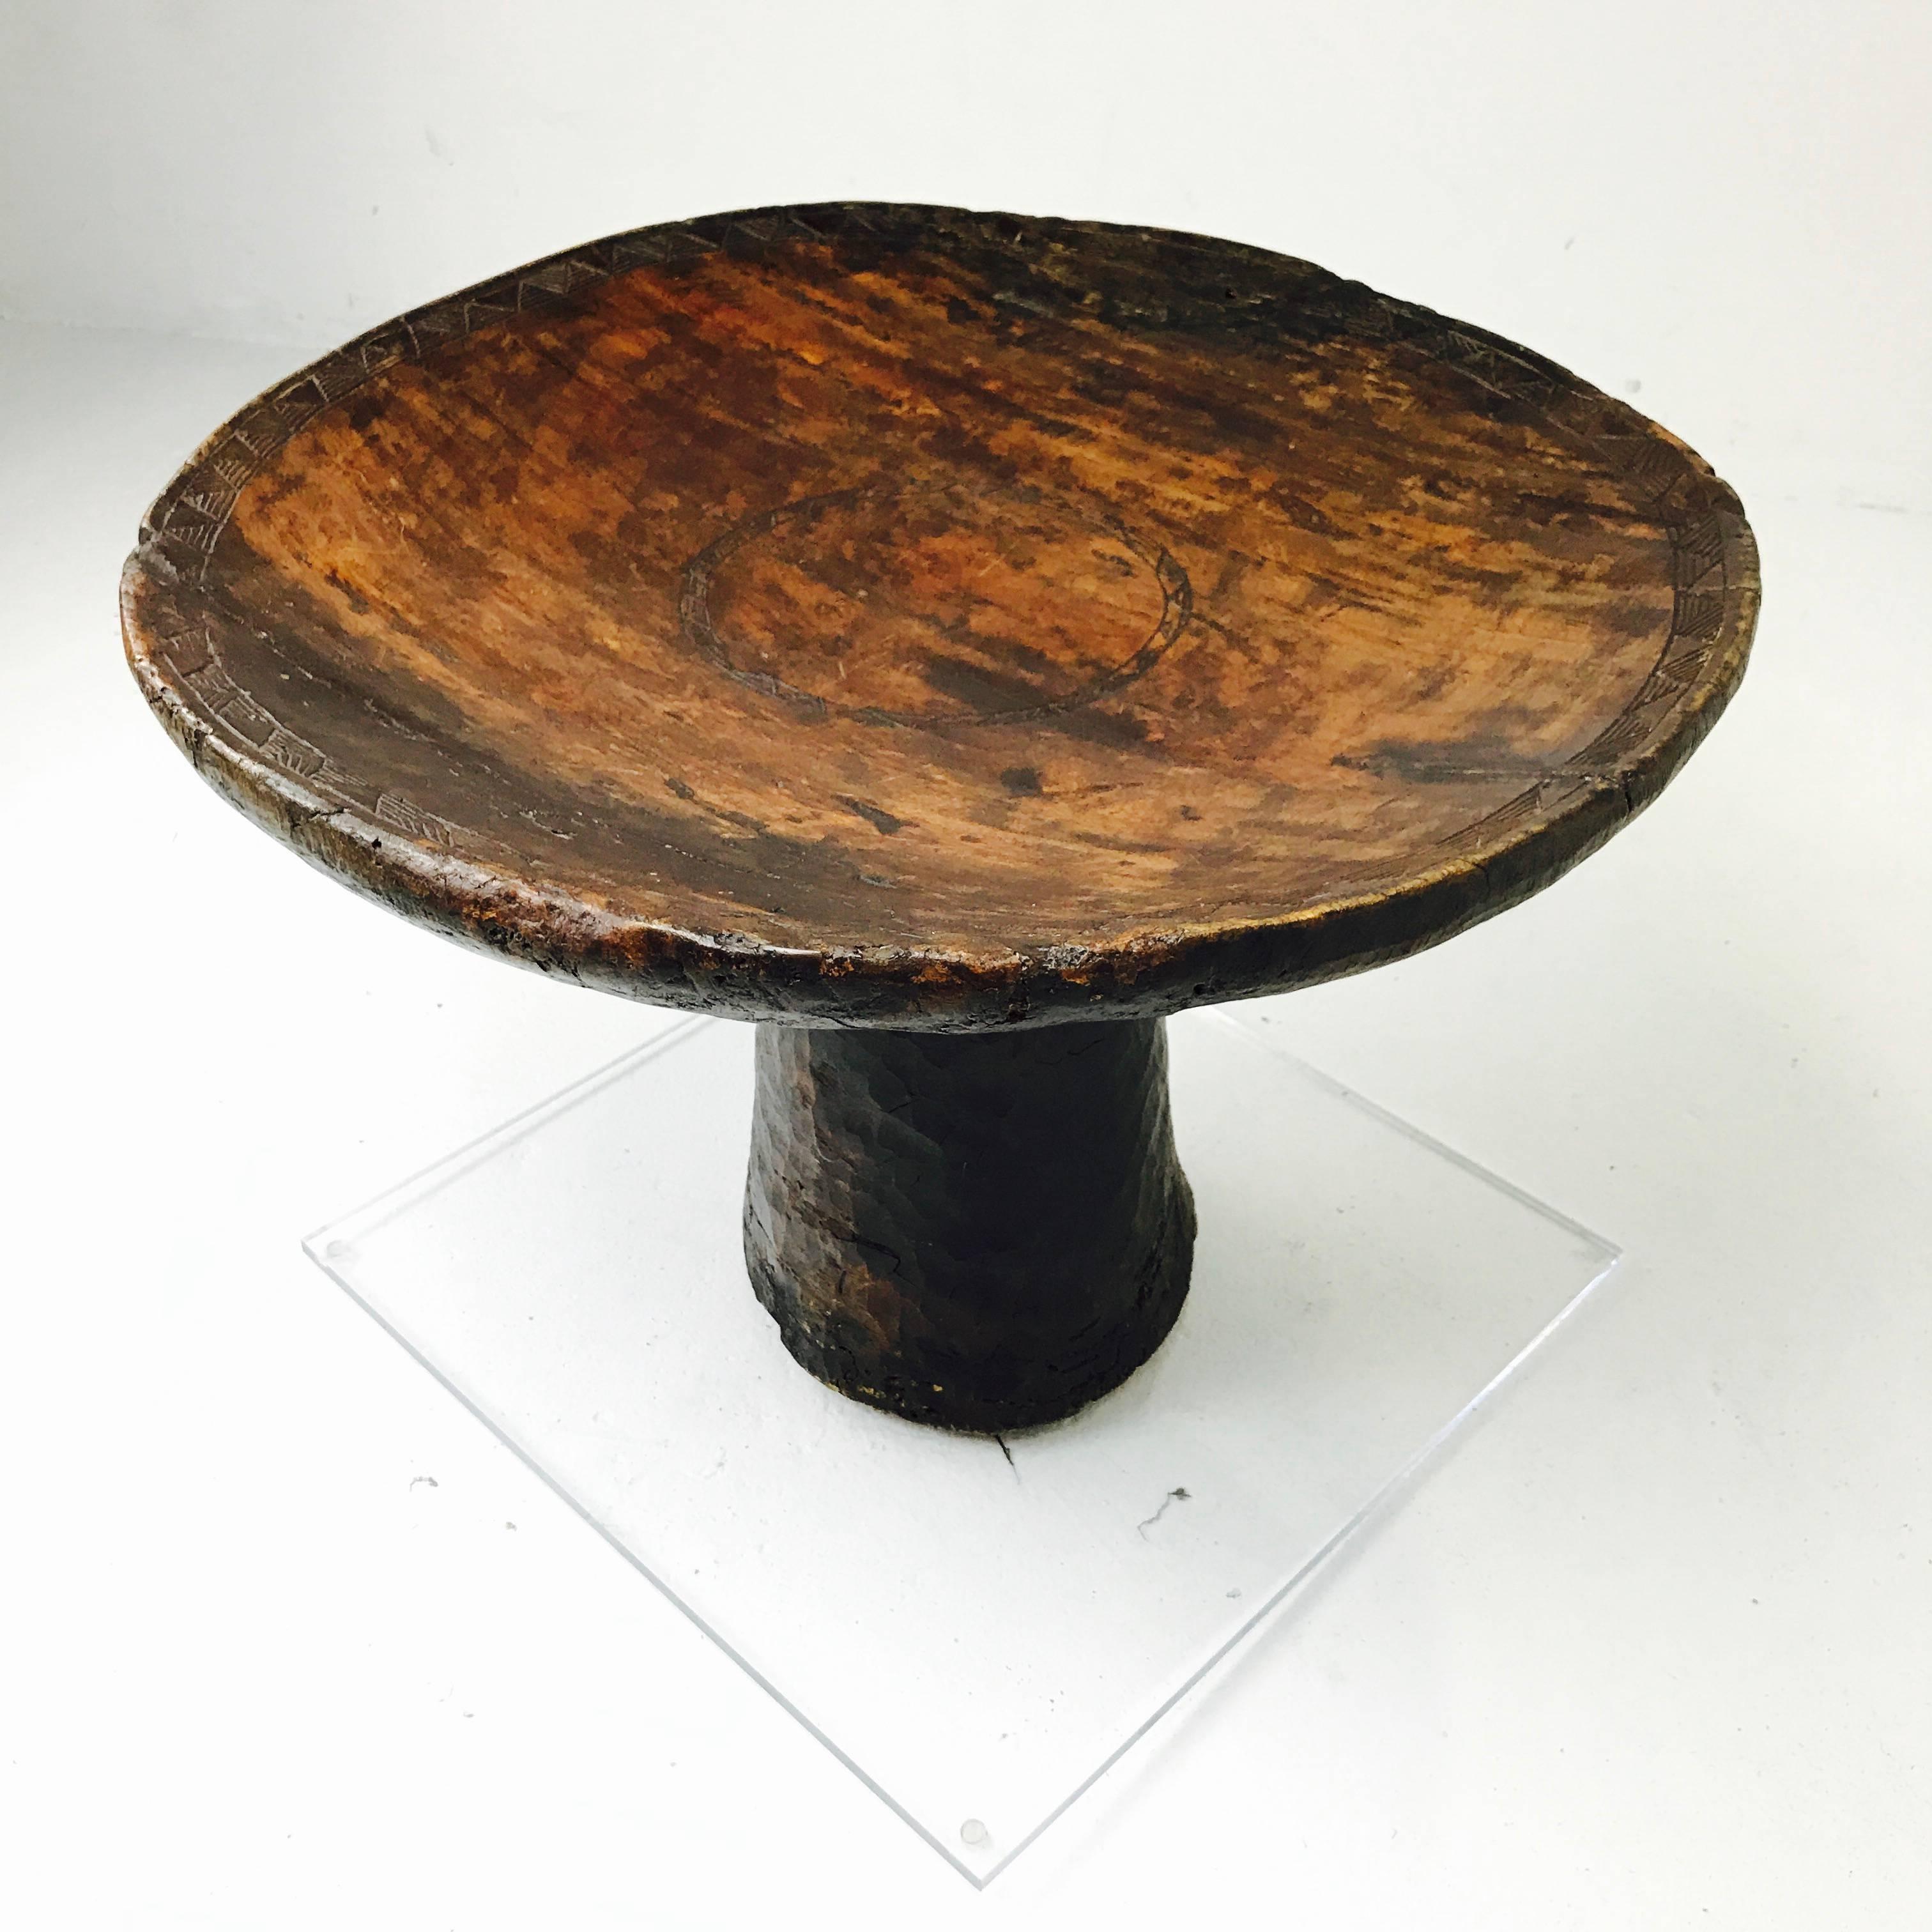 African carved ceremonial wedding stool/table with Lucite base. Once used to place wedding gifts on. Carved from a one piece of solid wood in the early 1900s. Was modernized with a Lucite base. Table does show wear to due age and